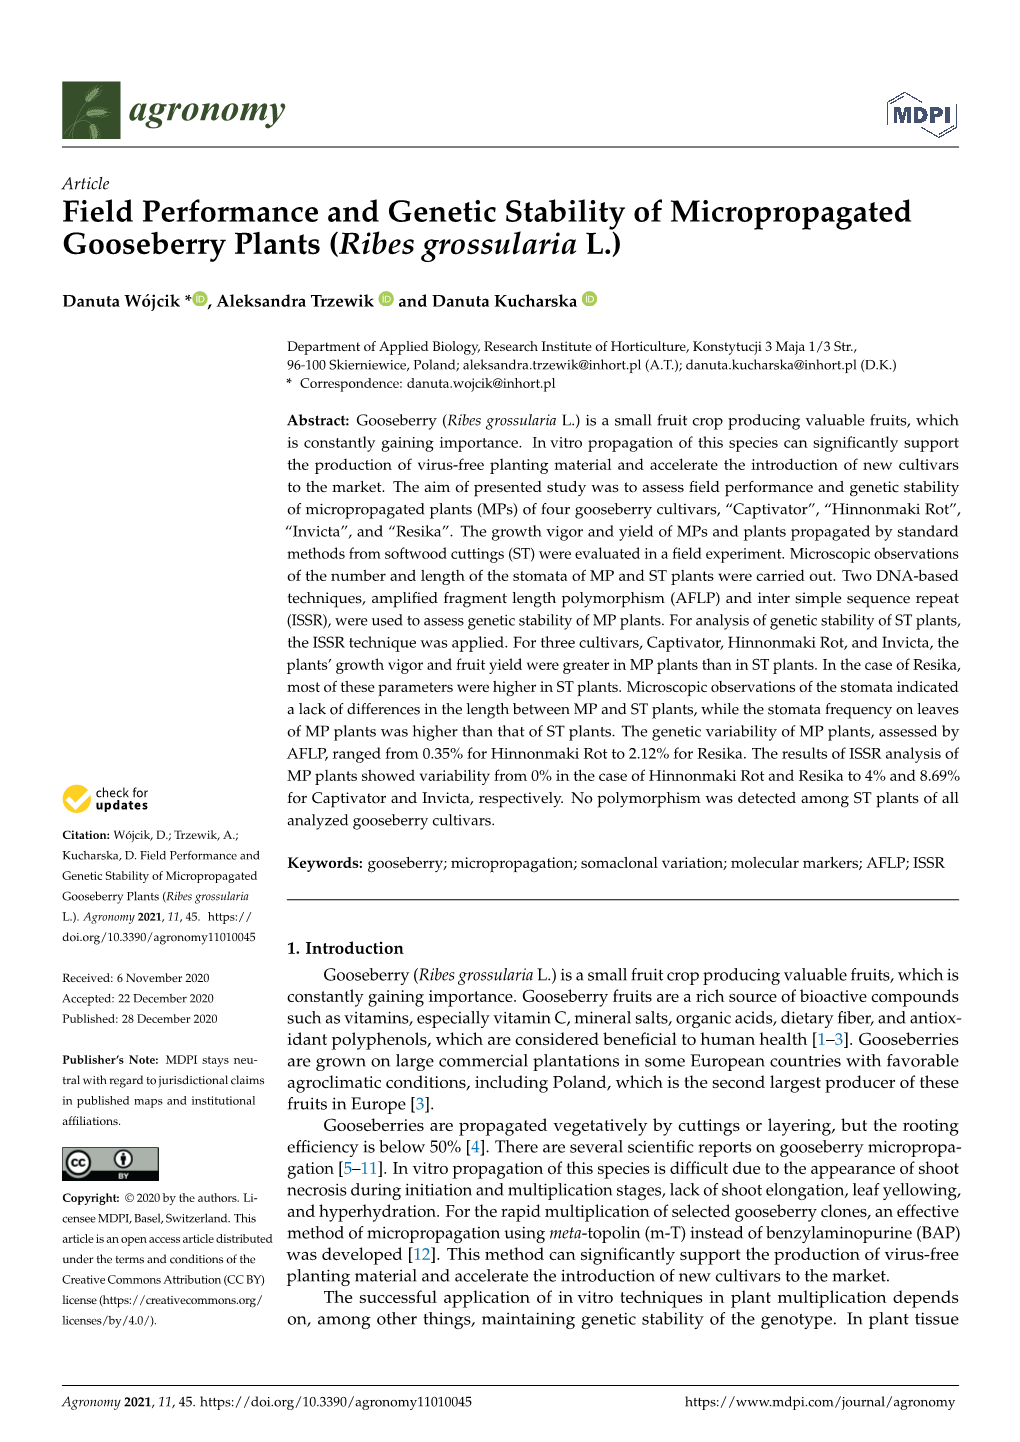 Field Performance and Genetic Stability of Micropropagated Gooseberry Plants (Ribes Grossularia L.)